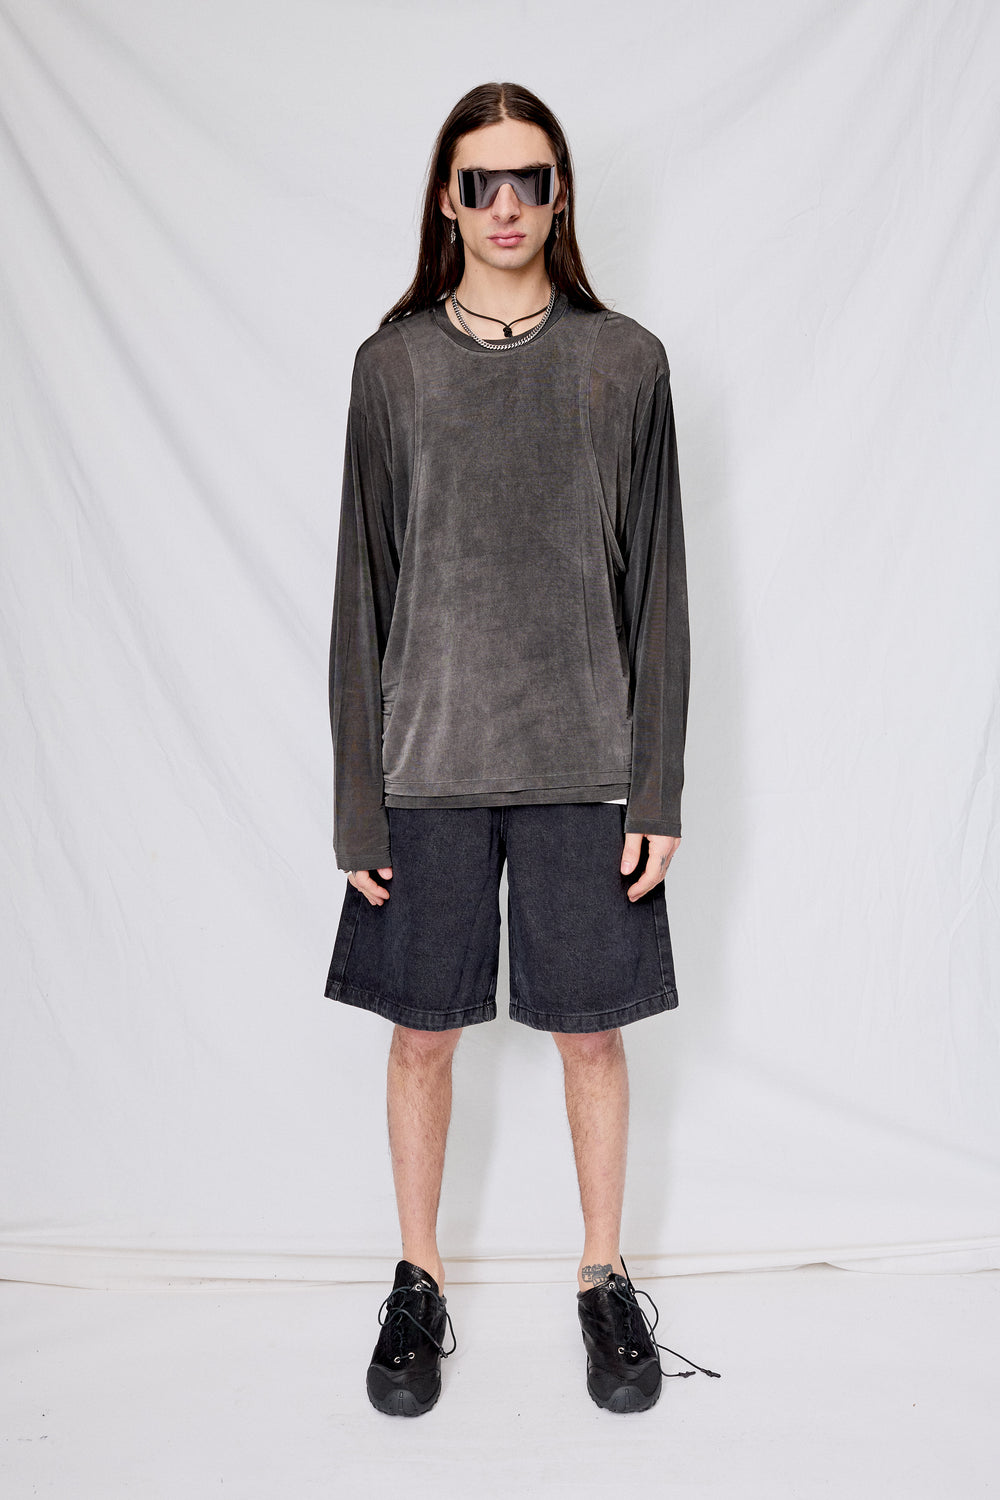 T-Shirts and Sweatshirt - Assembly New York | Assembly New York